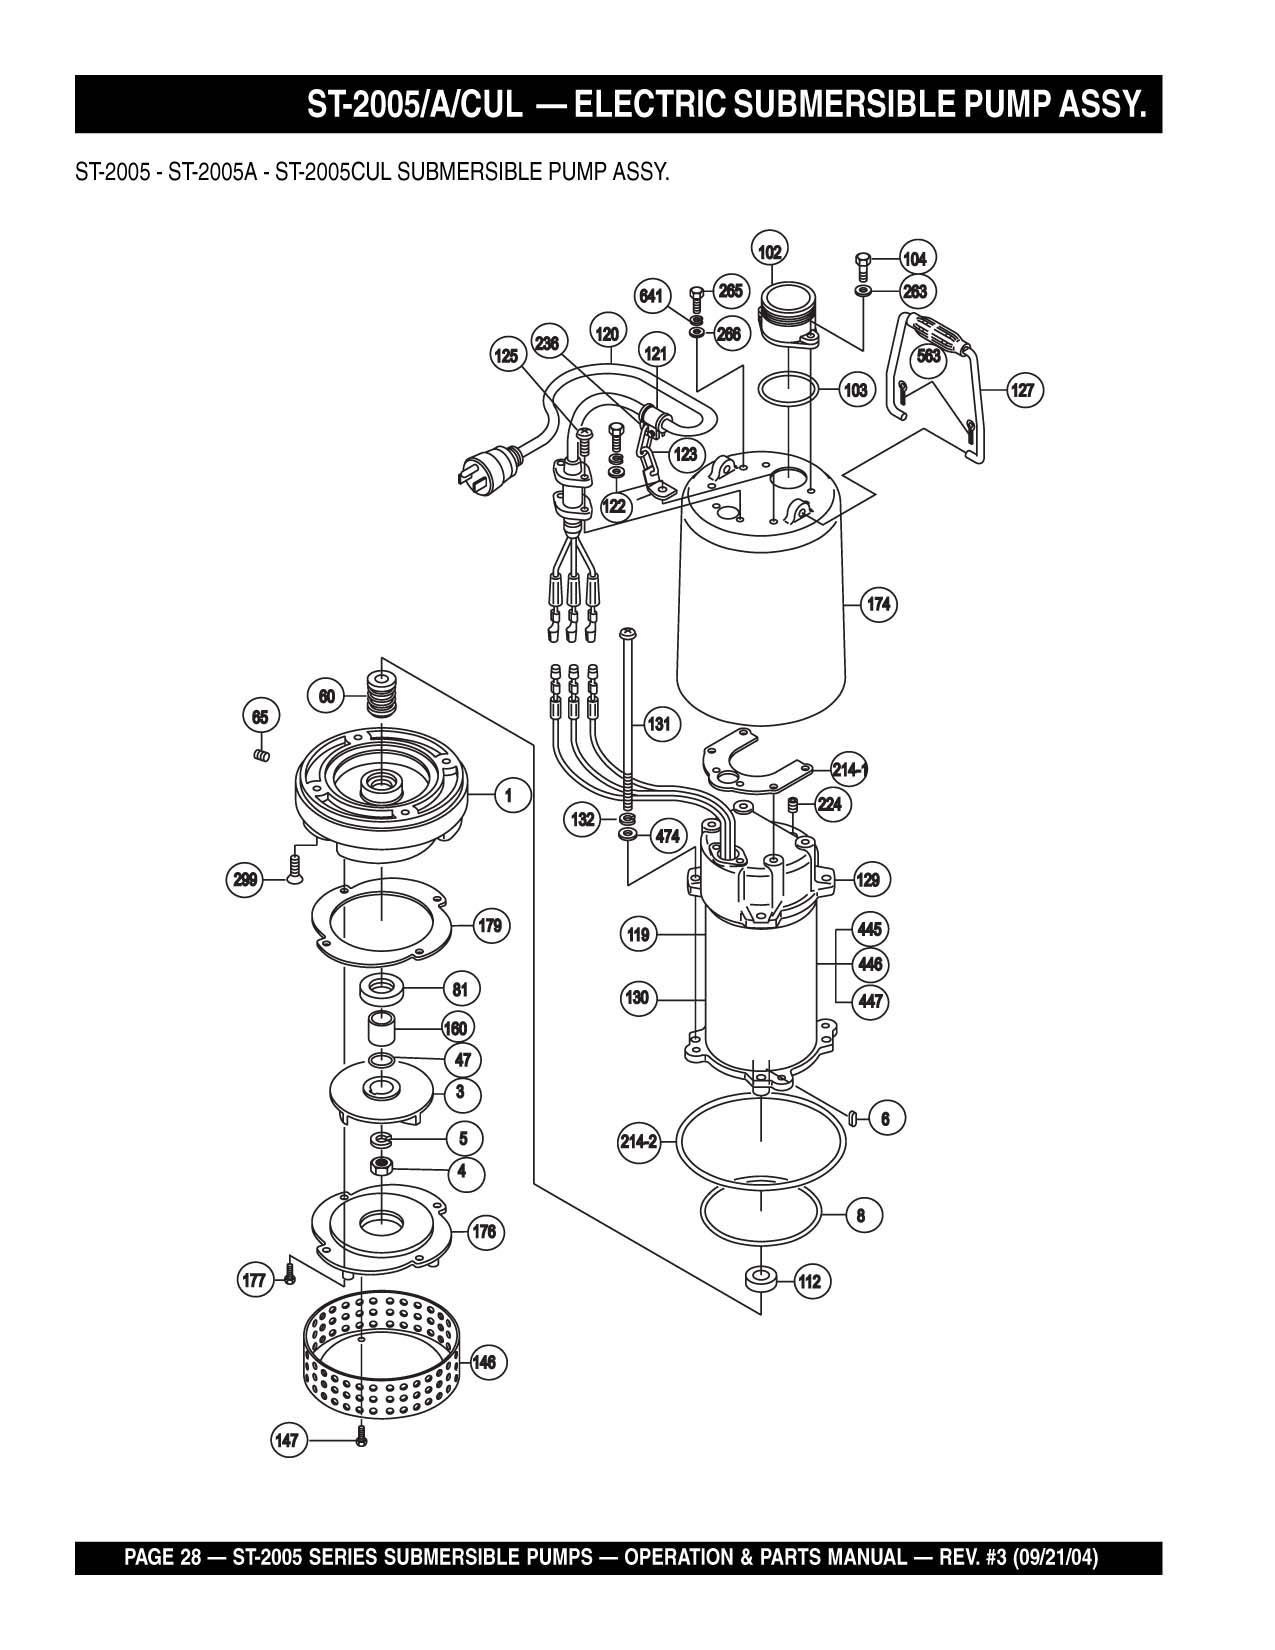 Wiring Diagram For Submersible Pump